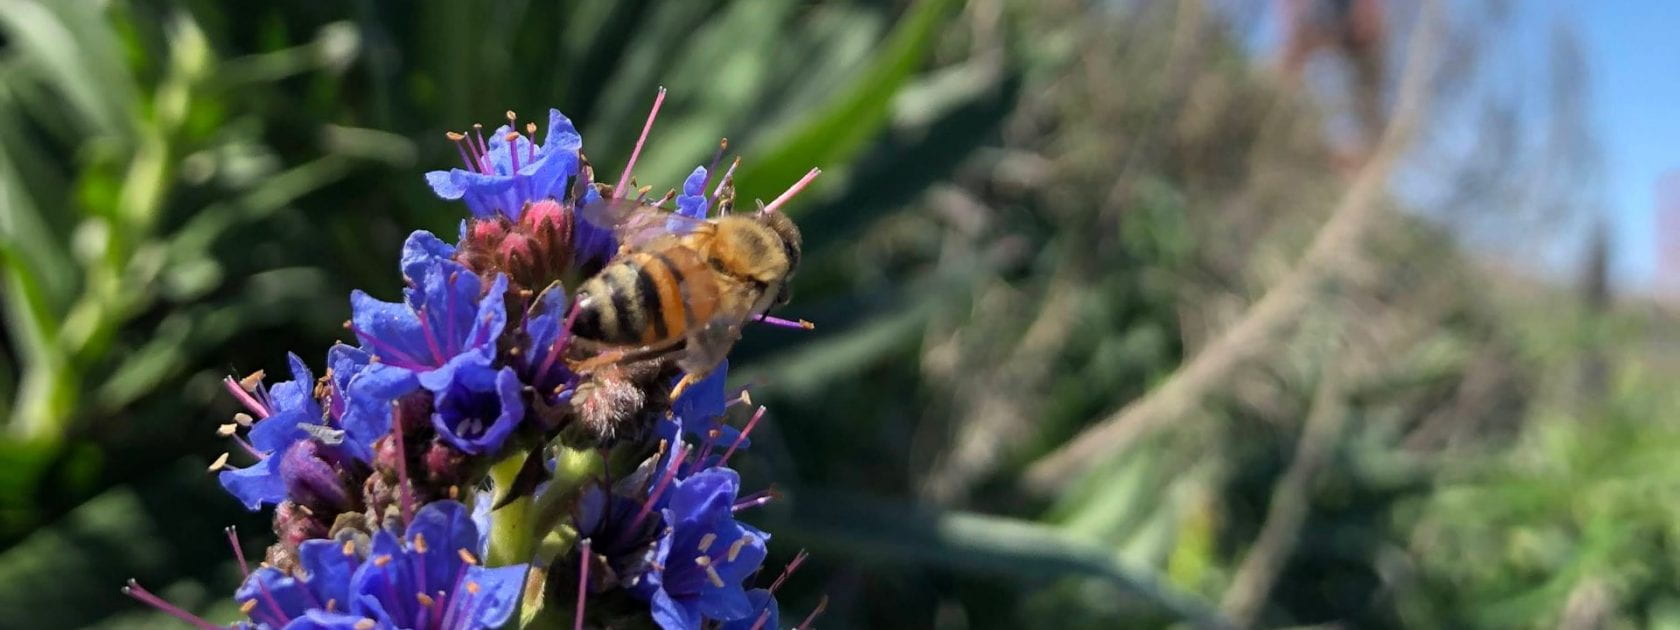 Closeup picture of single honeybee on blue flower within a field